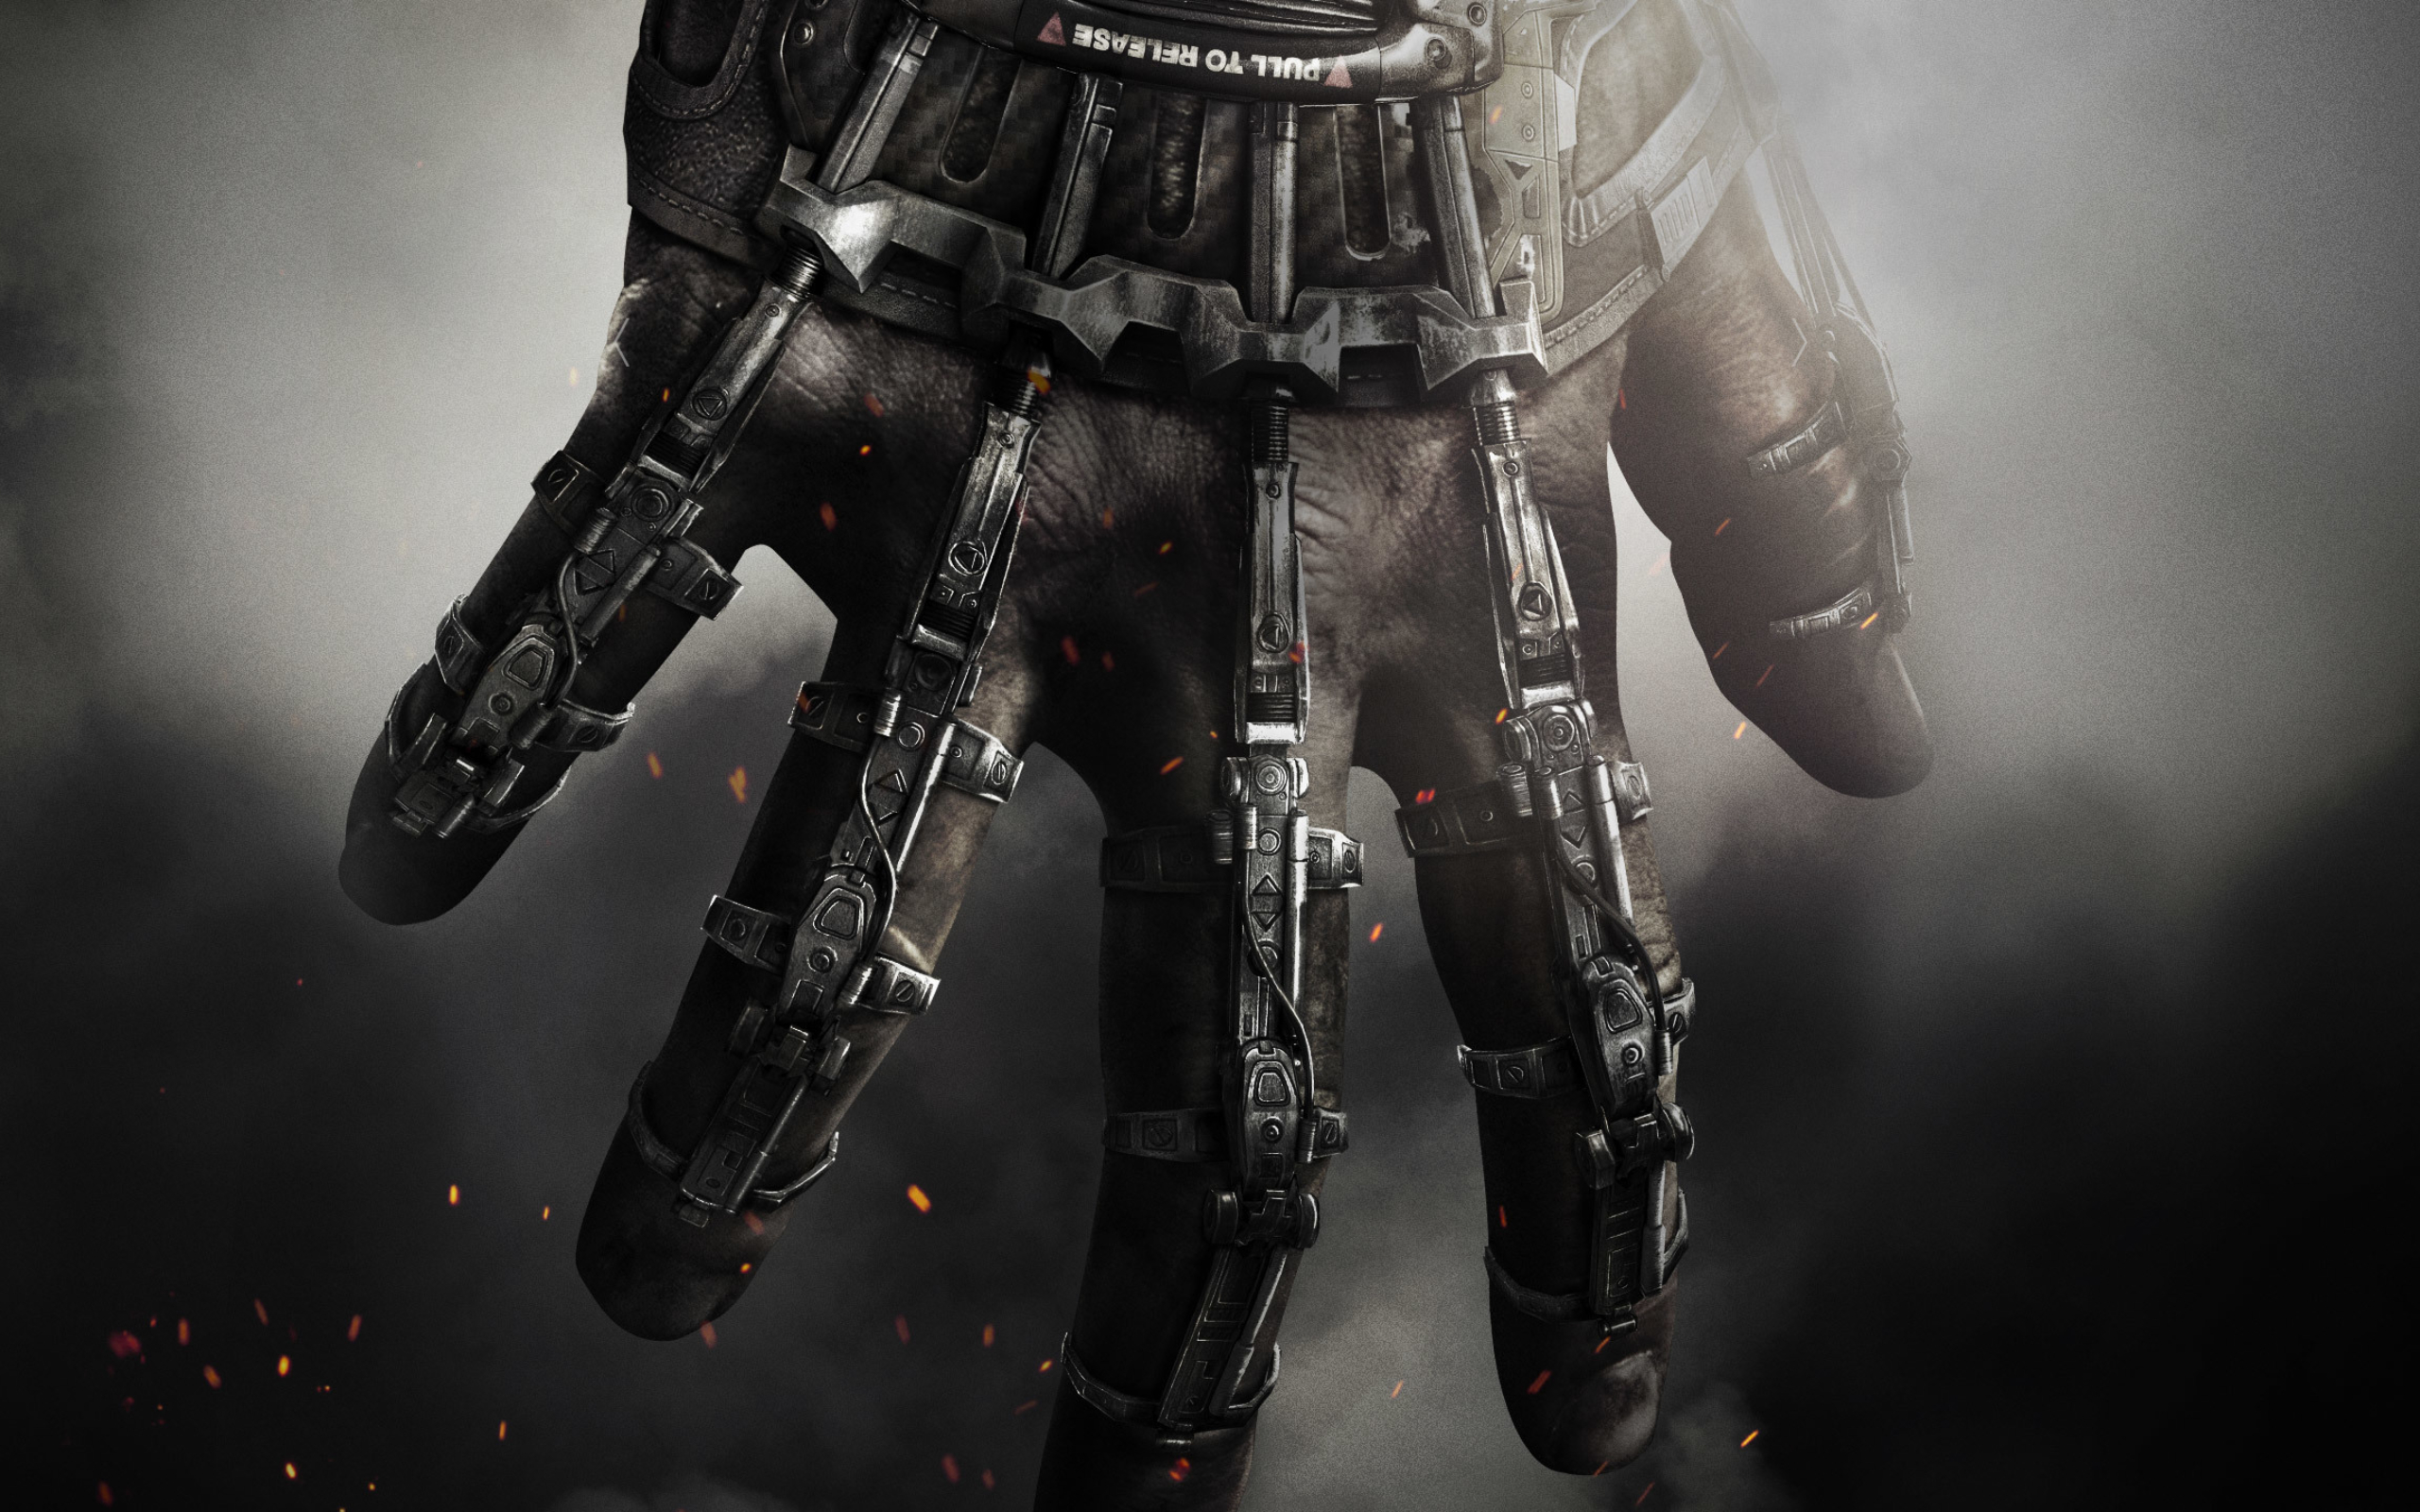 Wallpaper Call of Duty Advanced Warfare, Call of Duty, Call of Duty Black  Ops Iii, Call of Duty Zombies, Call of Duty 2, Background - Download Free  Image